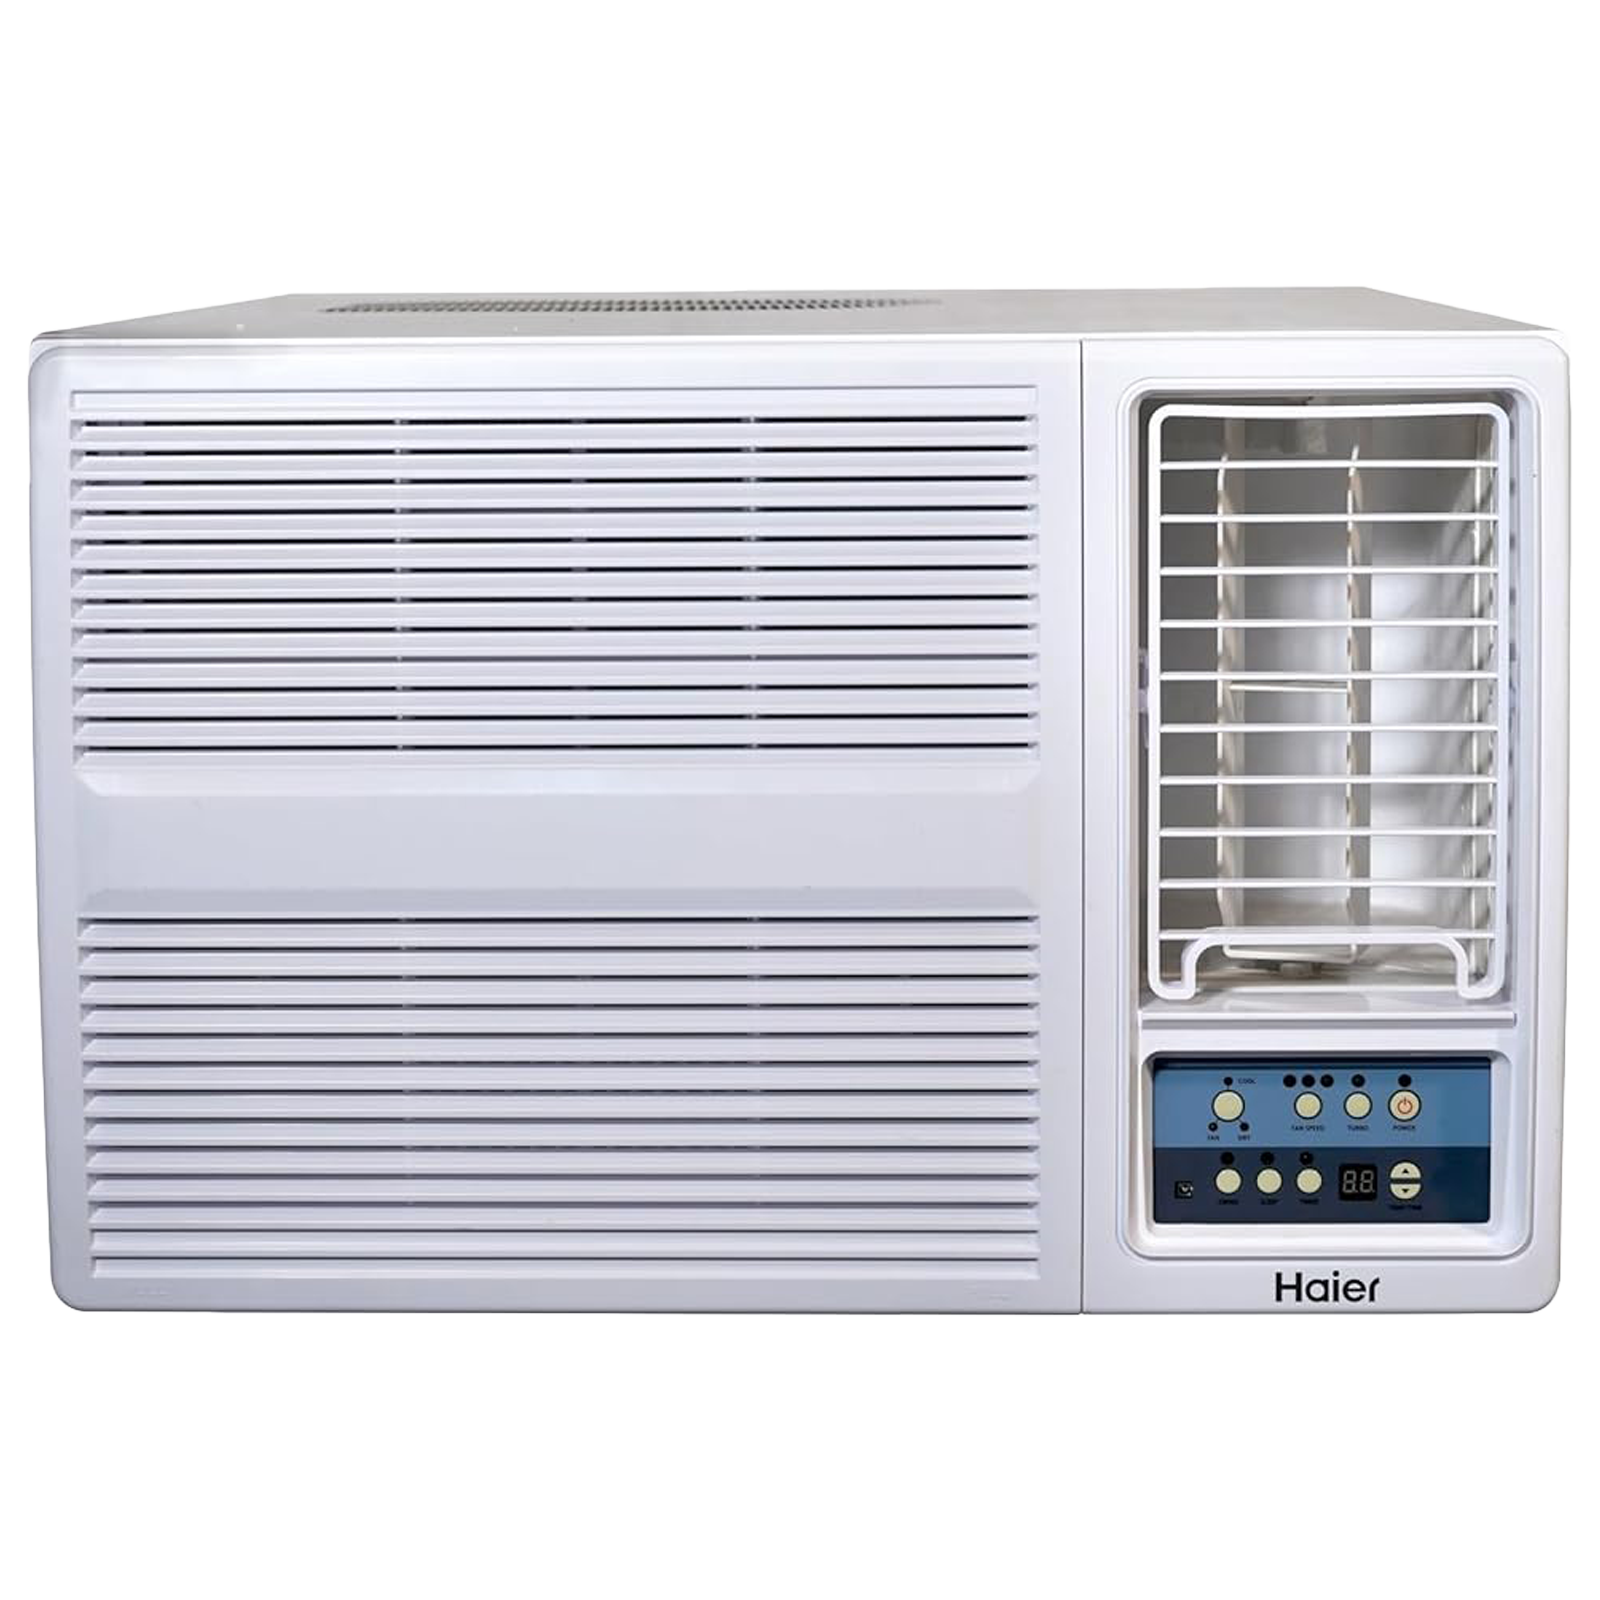 Haier 1.5 Ton 3 Star Fixed Speed Window AC (Copper Condenser, Anti Bacterial Filter, HWU18FAOW3BNFS)